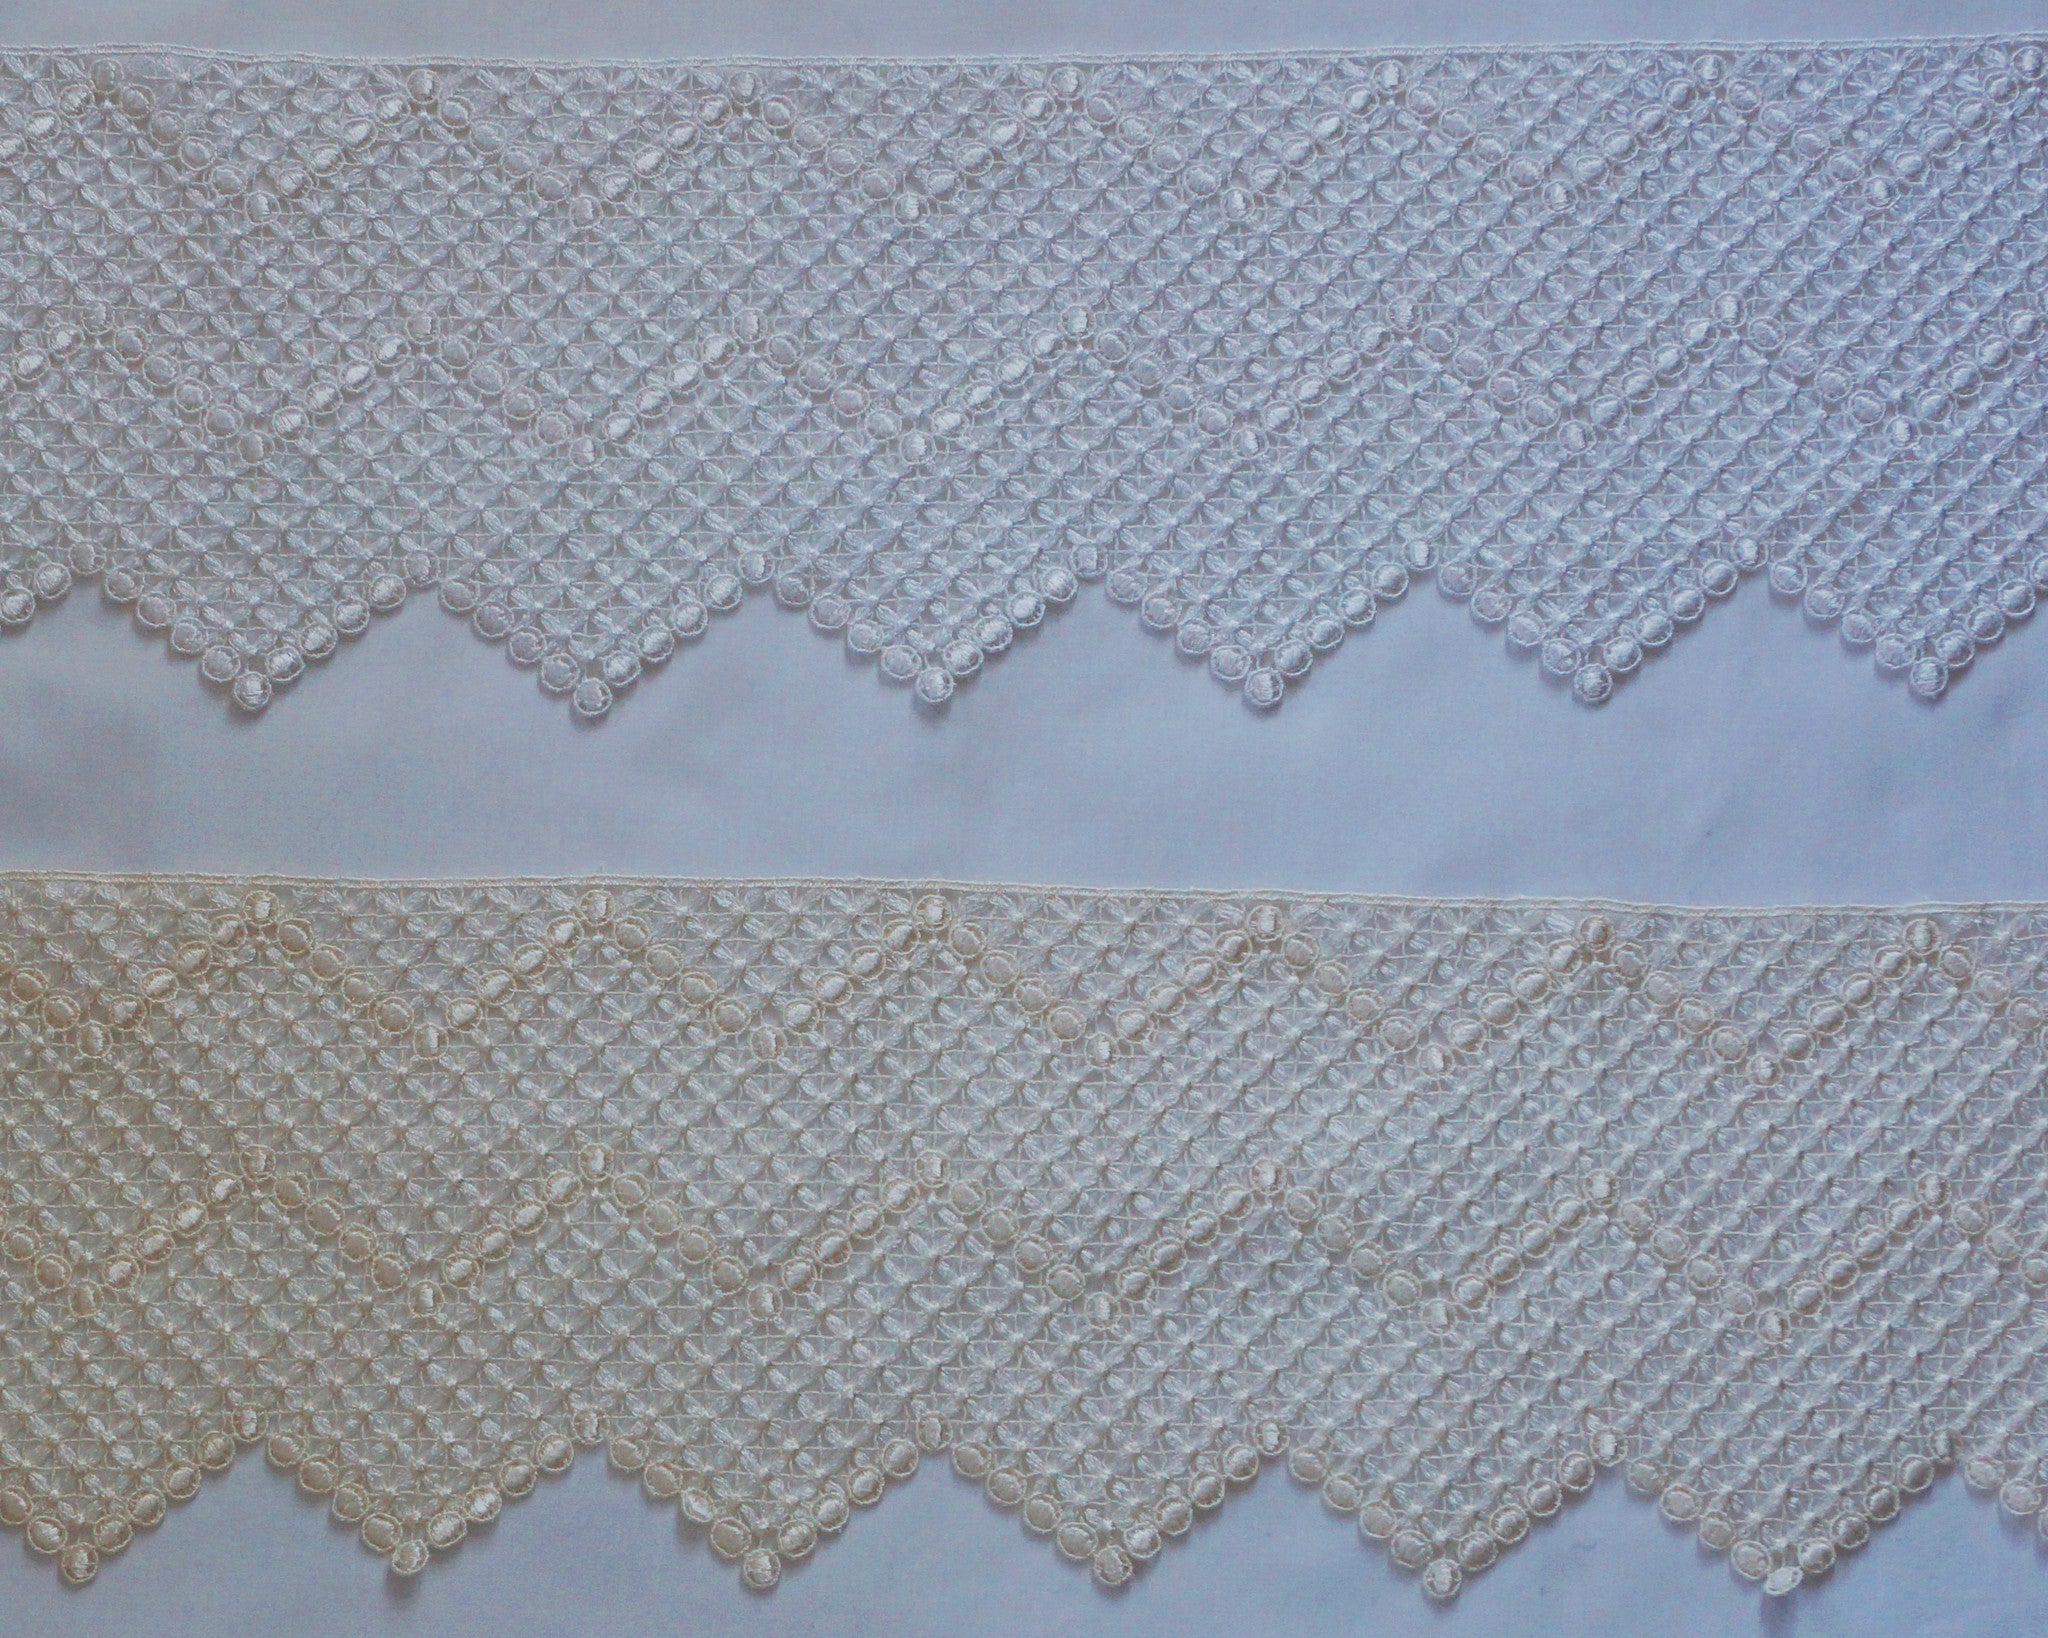 Exquisite lace trim with classic mosaic like pattern. White or rich cream color. Just under 7" wide.